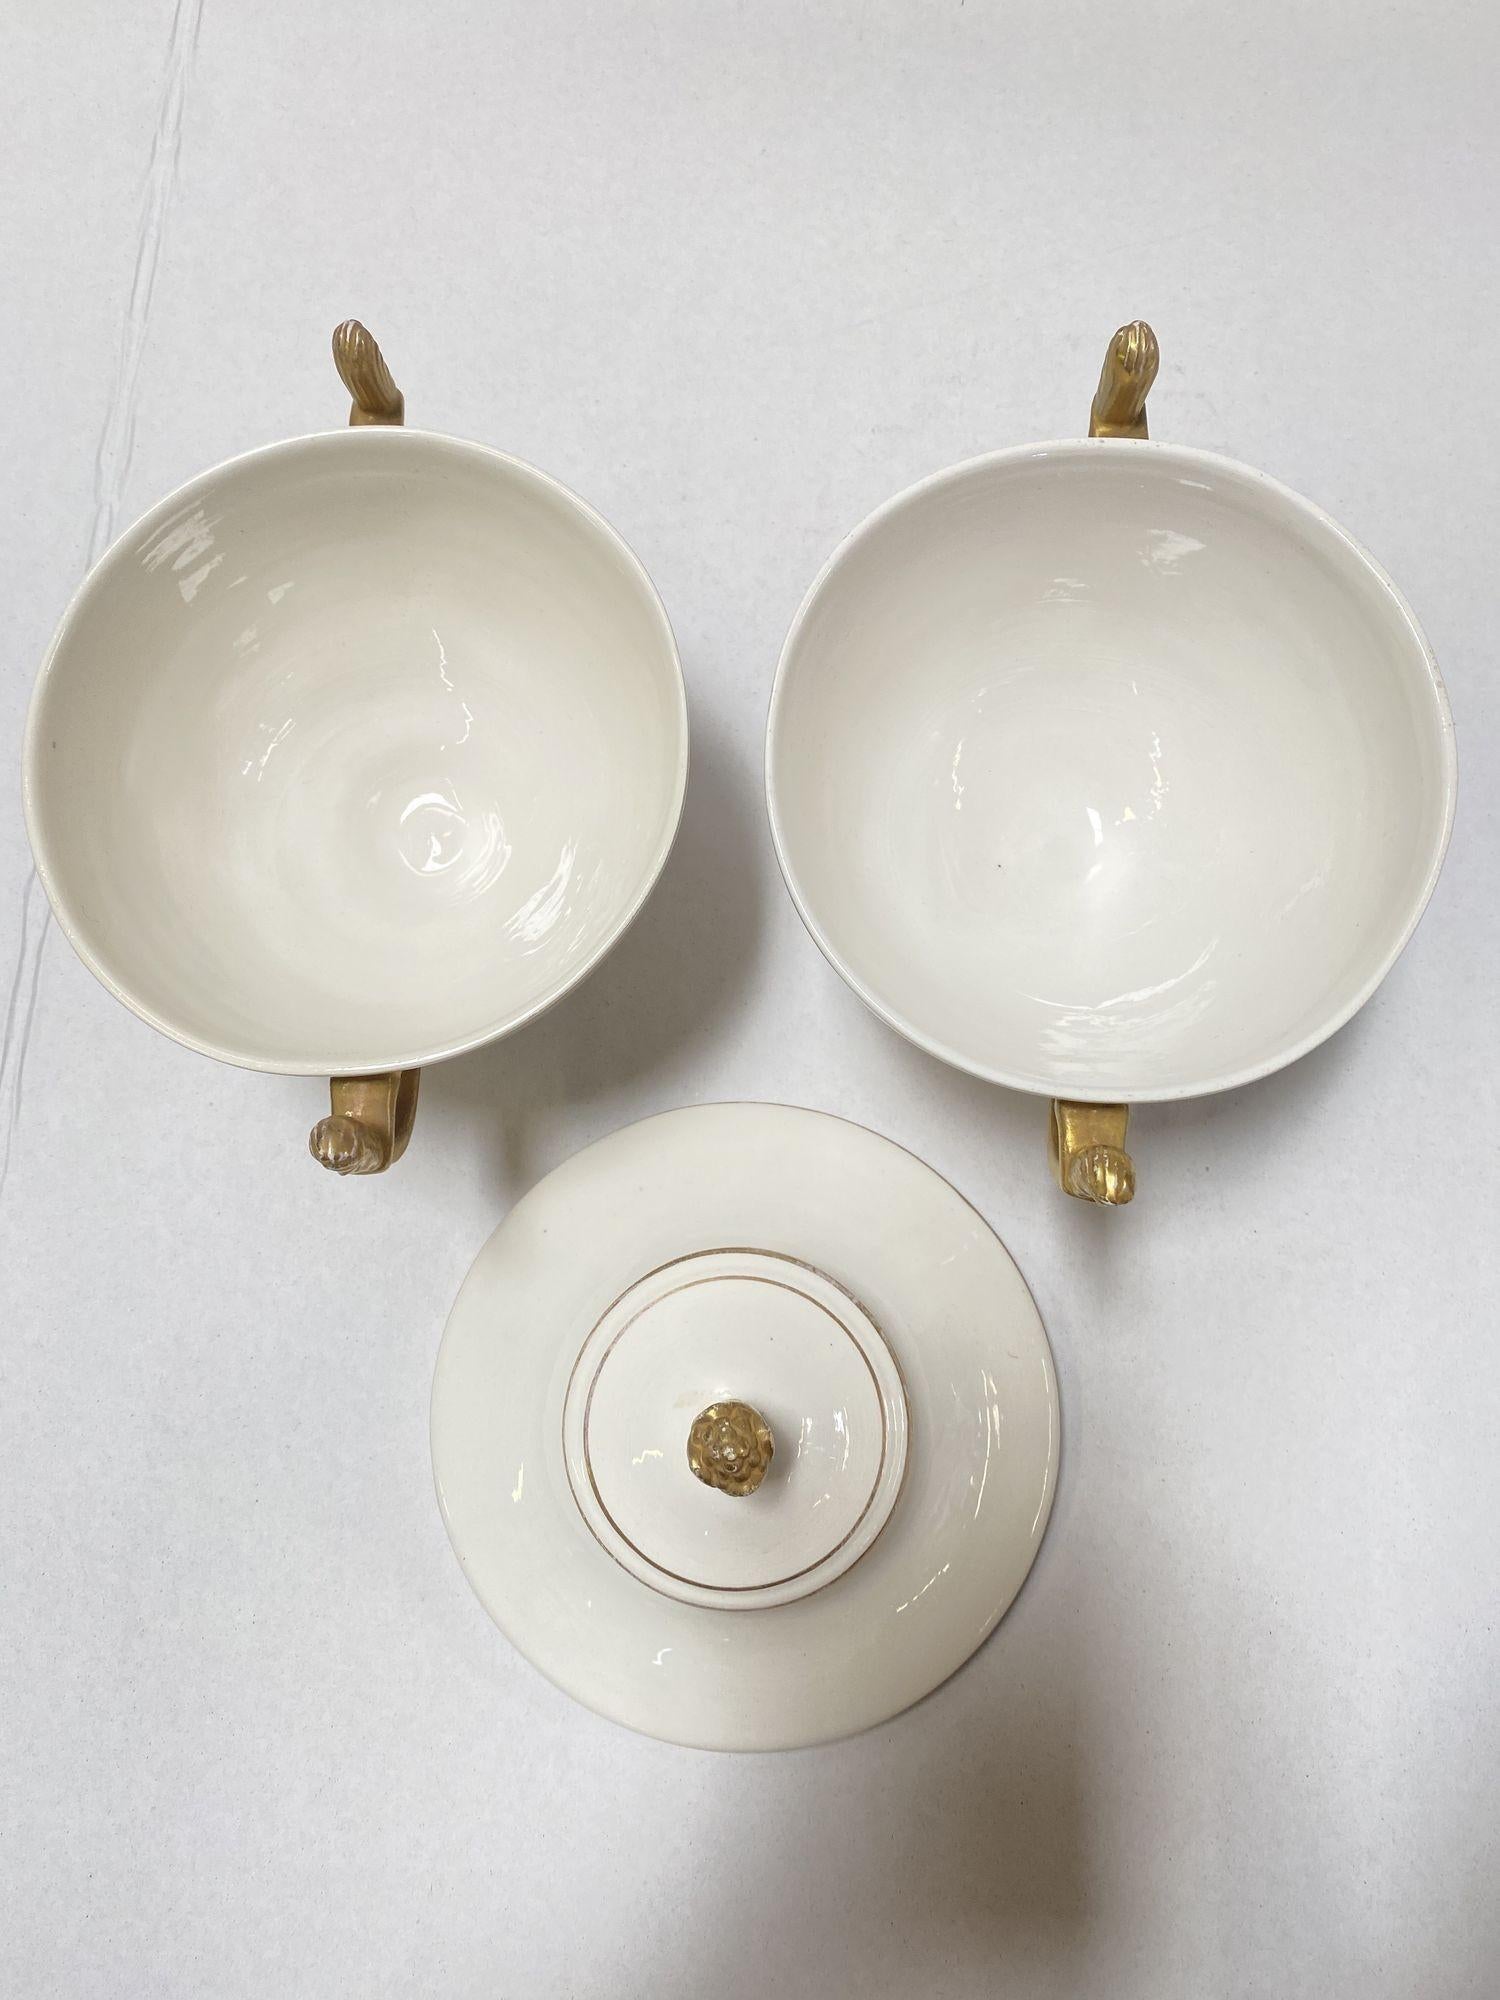 1910's Italian Ivory and Gold Sugar Holders/ Bowls with Lid In Excellent Condition For Sale In Van Nuys, CA